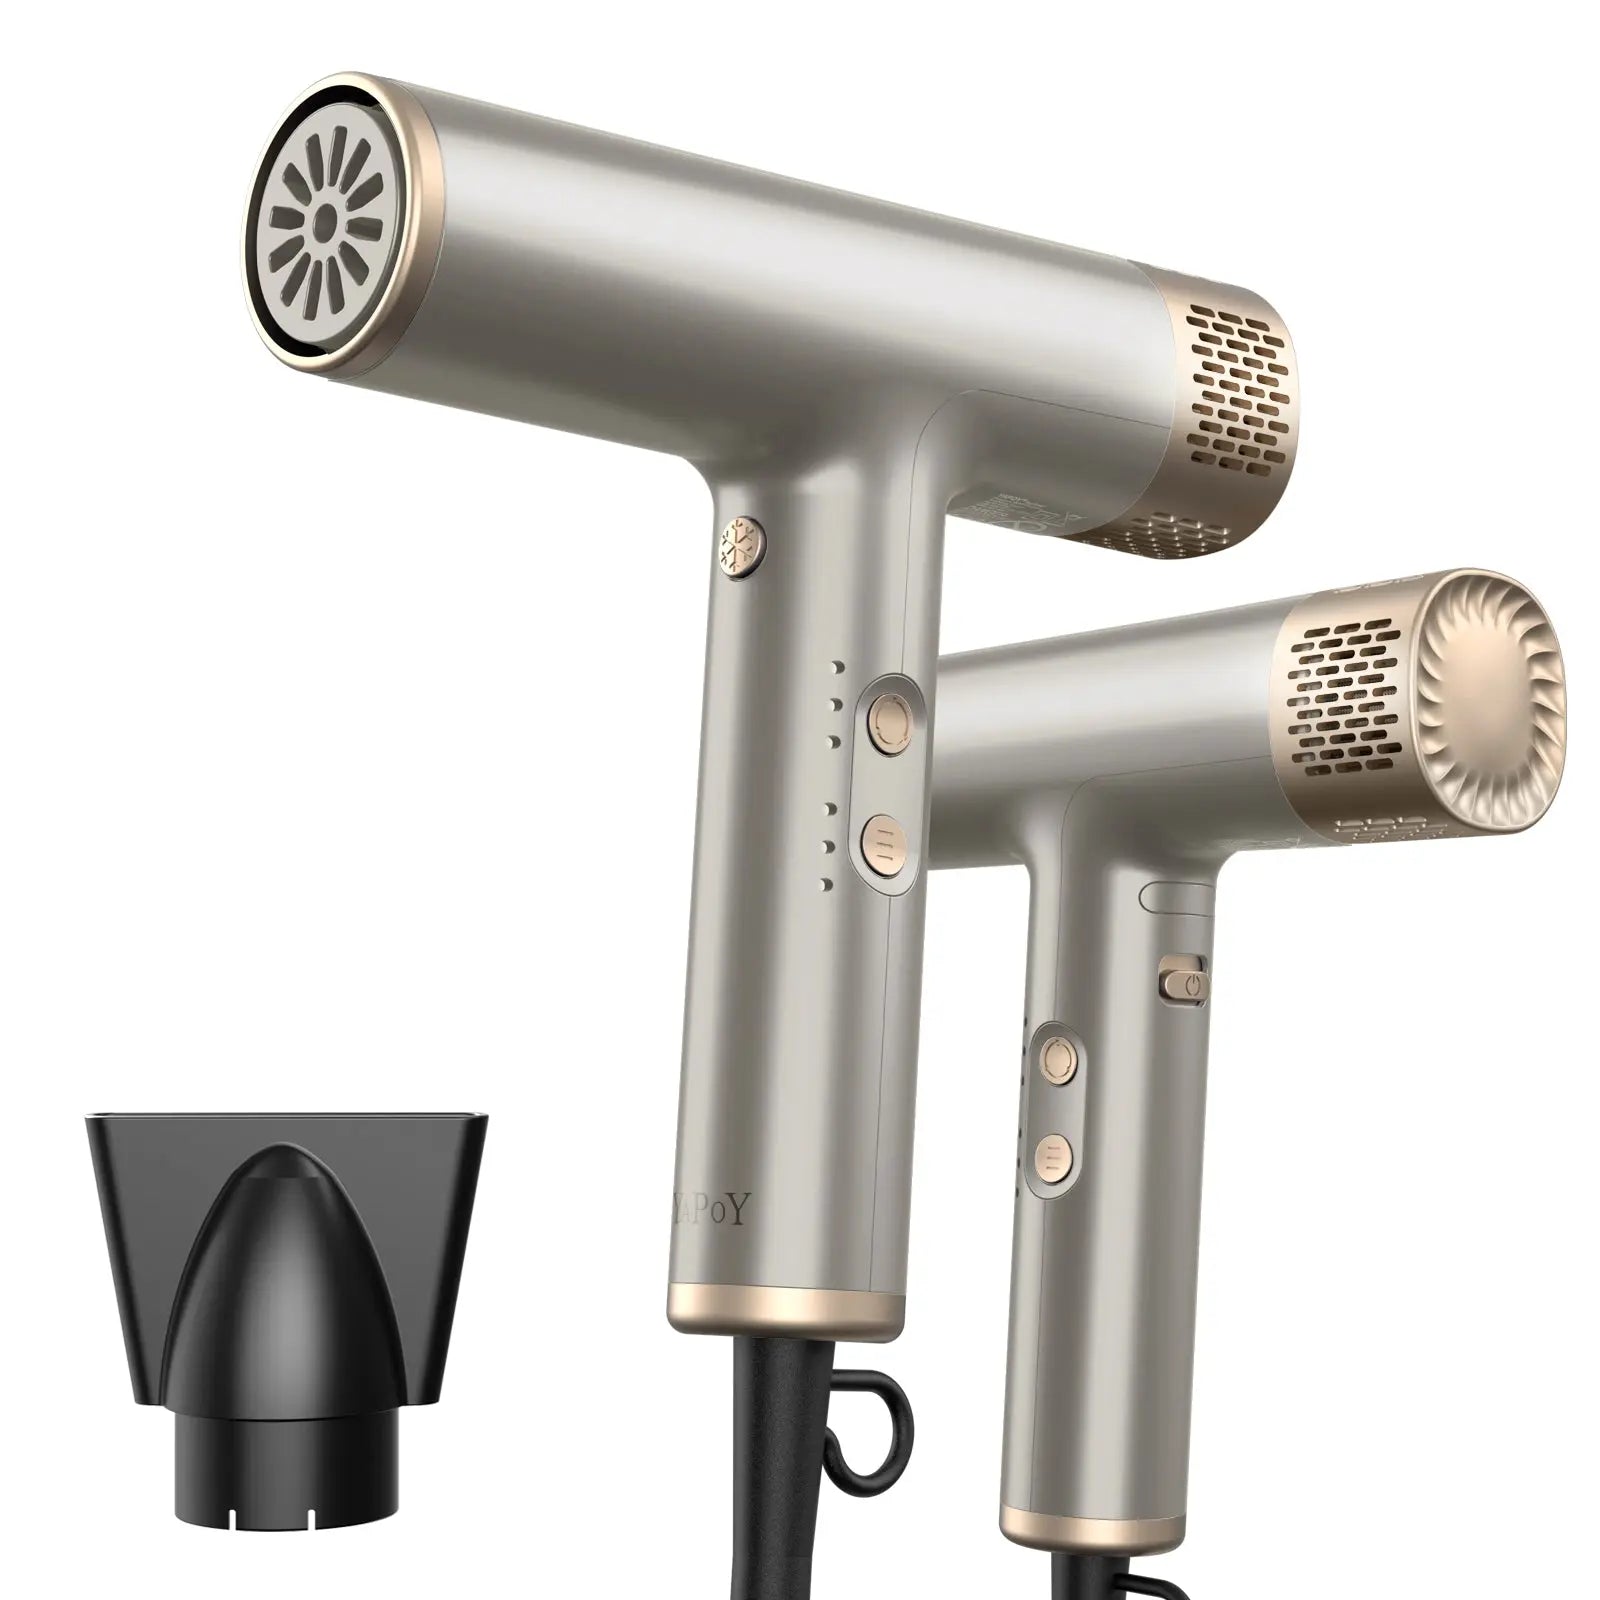 YAPOY High Speed Hair Dryer for a salon-quality experience at home3